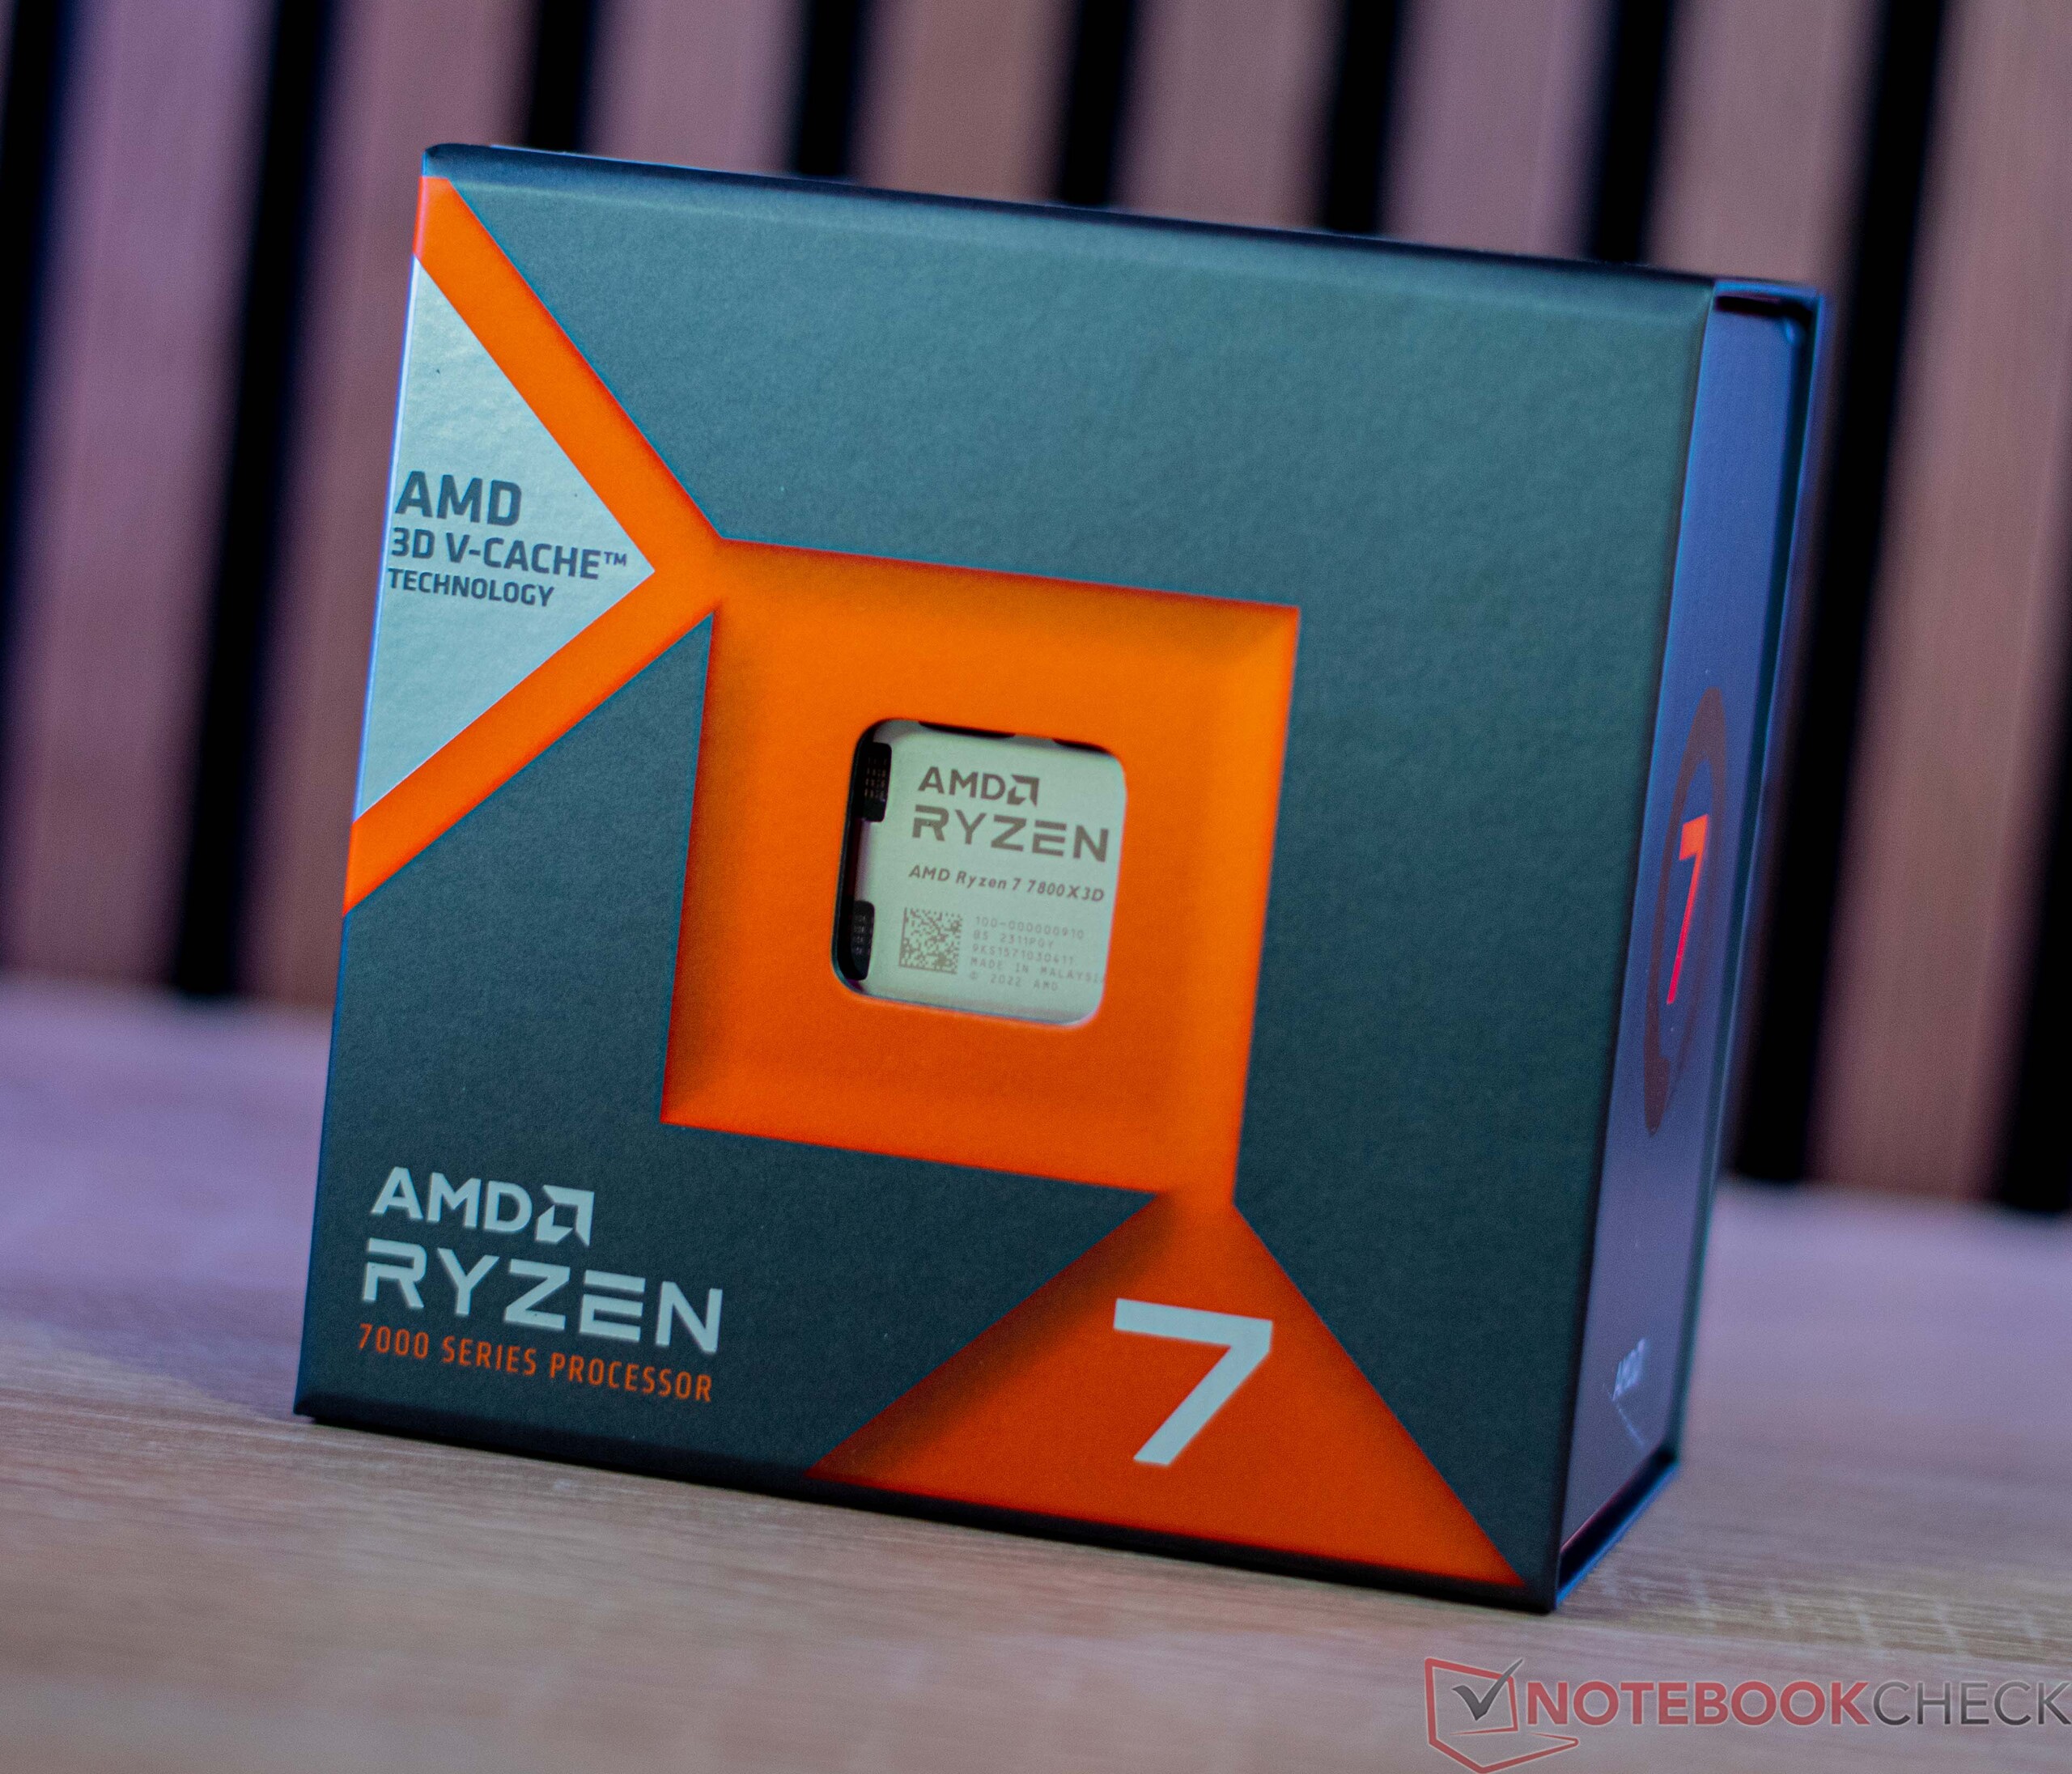 AMD Ryzen 7 7800X3D desktop CPU review: Faster than a Core i9-13900K thanks  to 3D V-Cache and only 8 cores -  Reviews